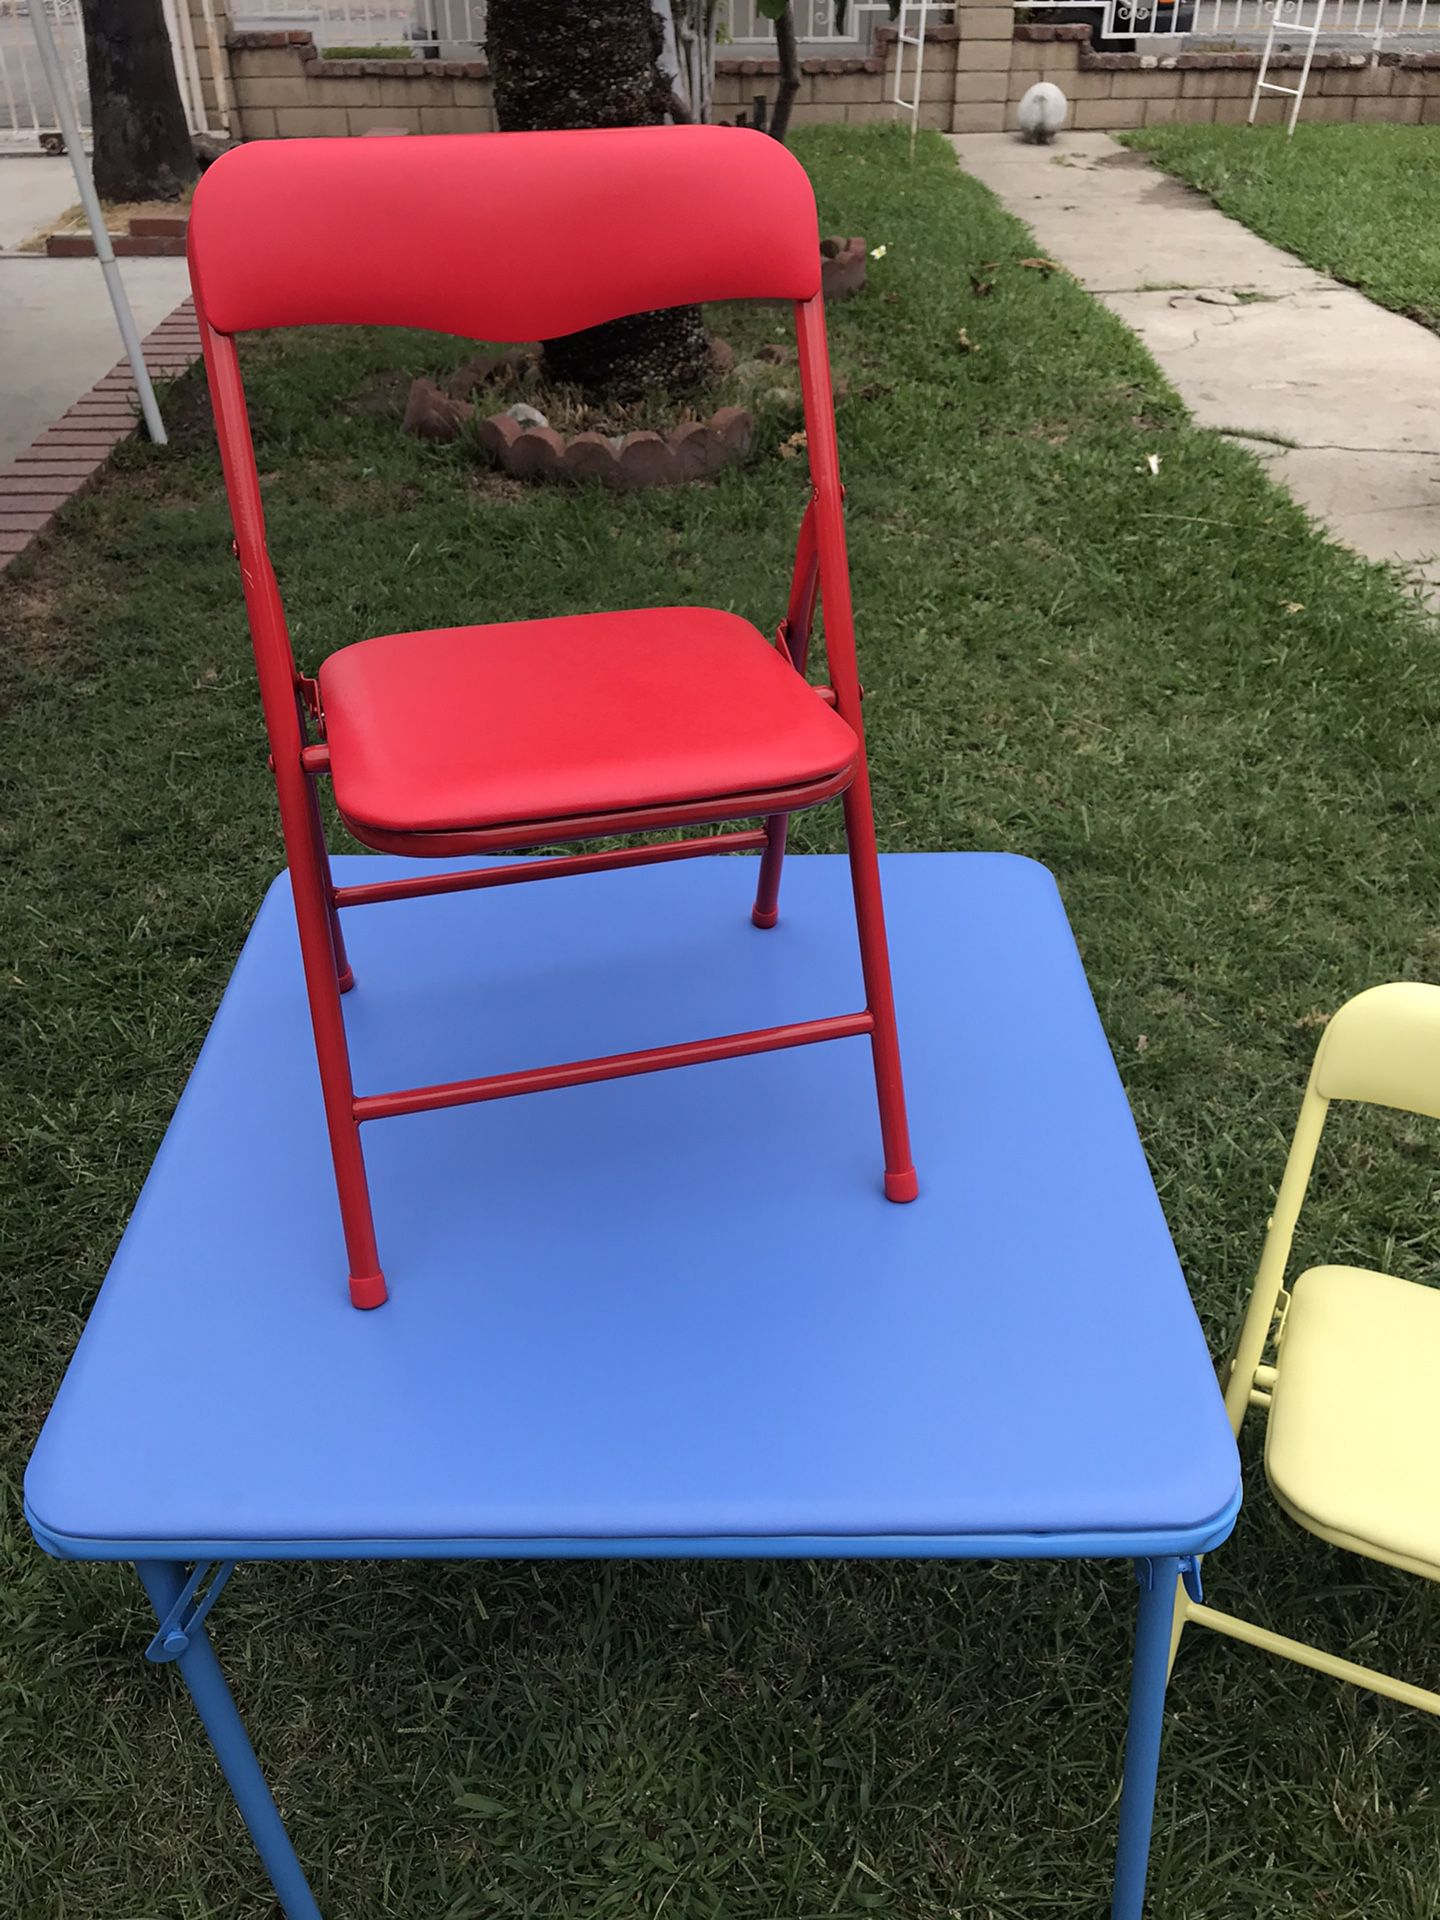 New Table and Chairs for kids